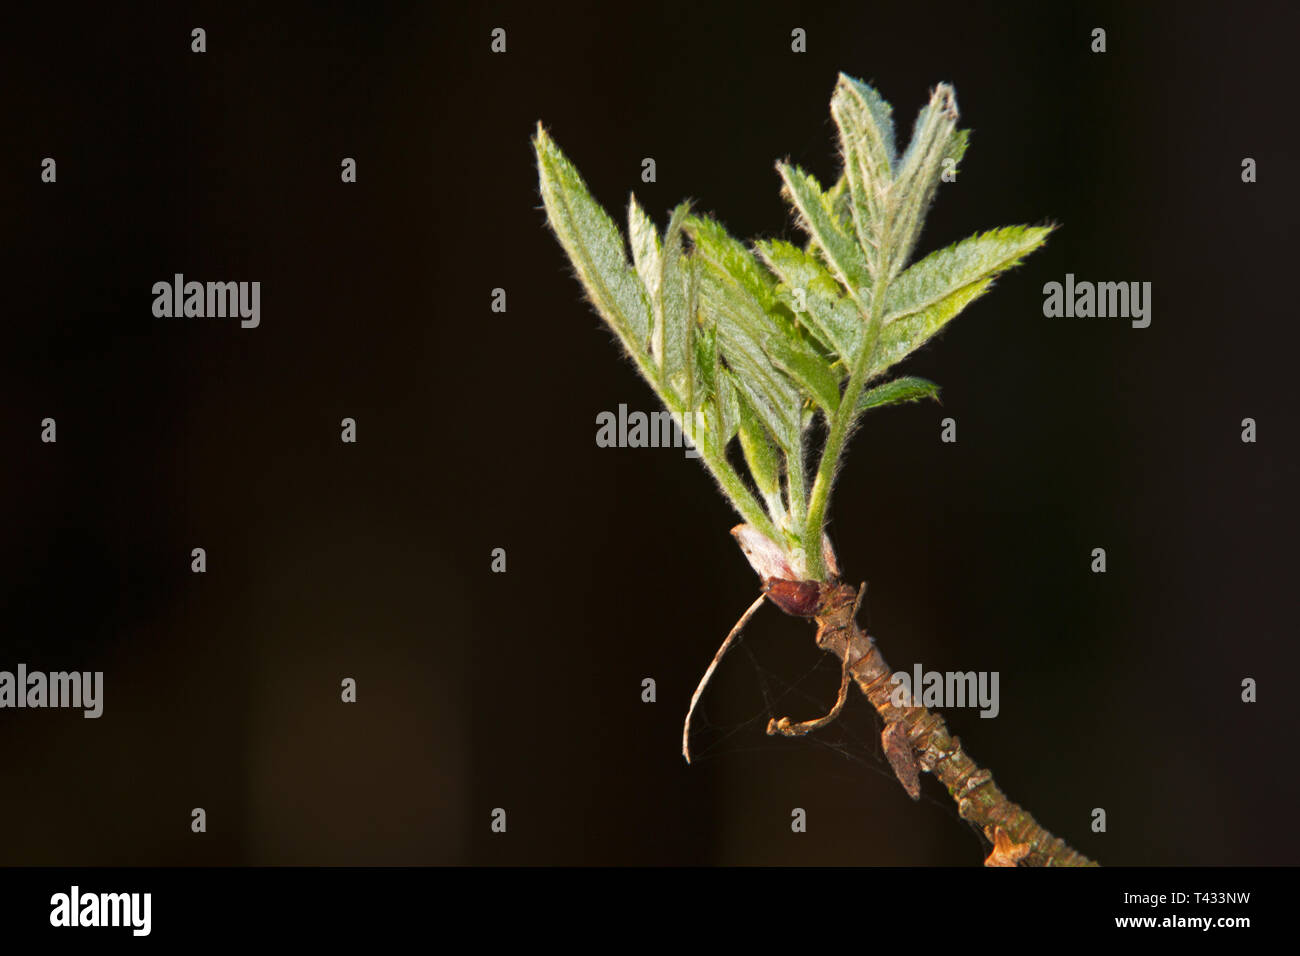 Unfolding leaves, bursting bud of a Rowan or Mountain-ash in a dark forest Stock Photo